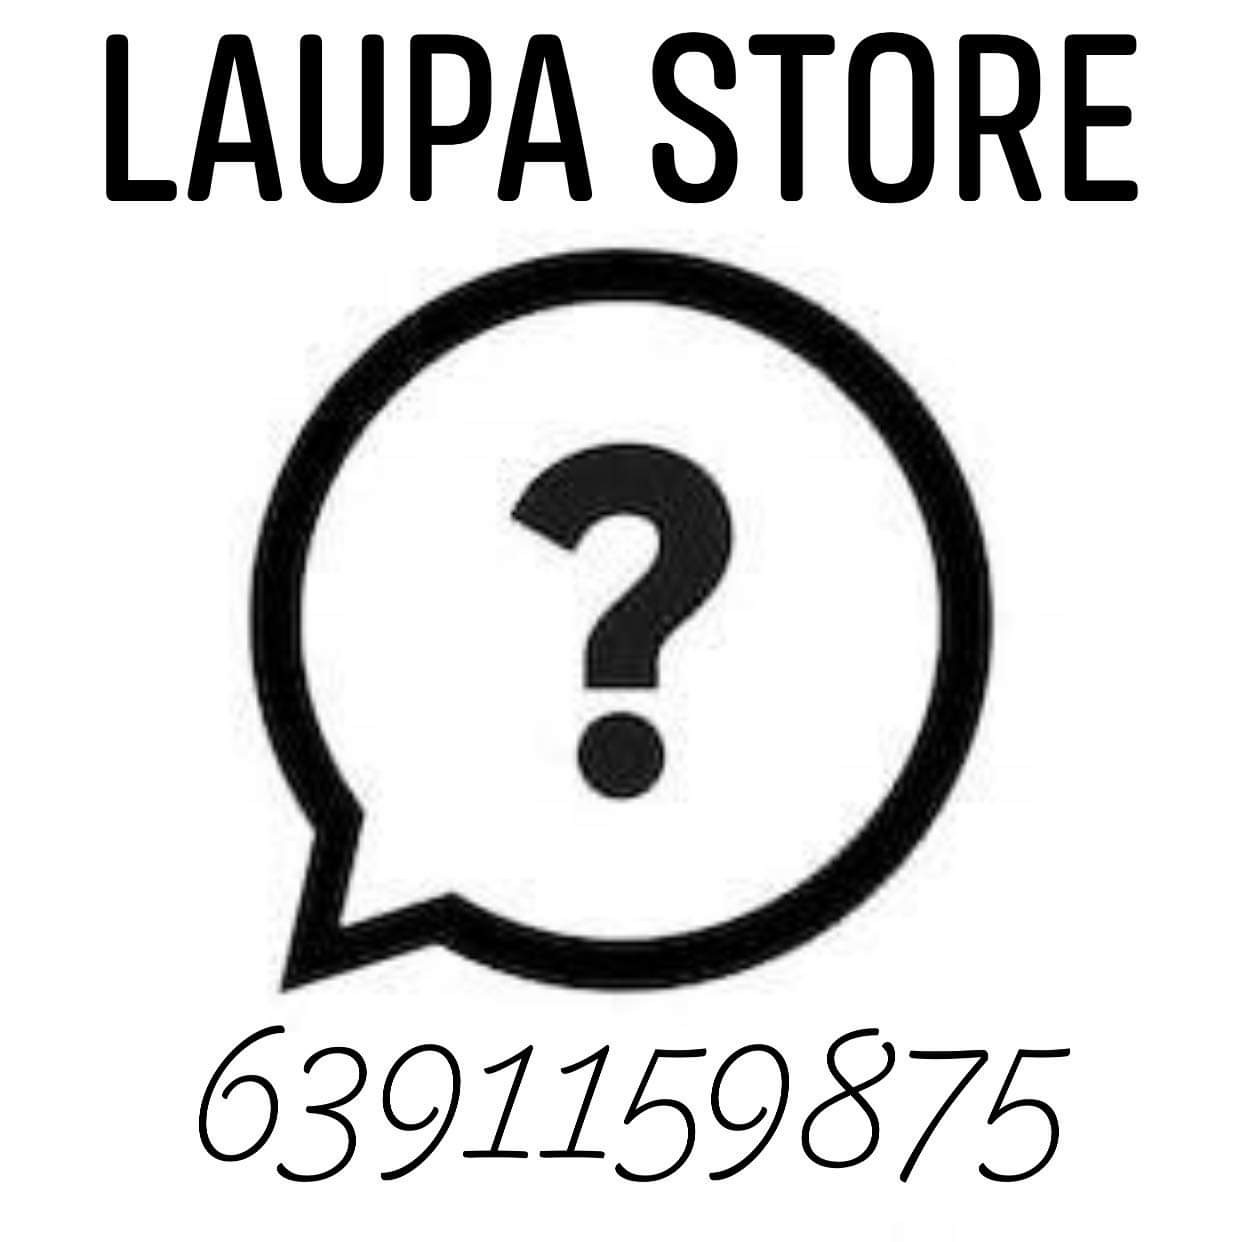 Laupa Store Online